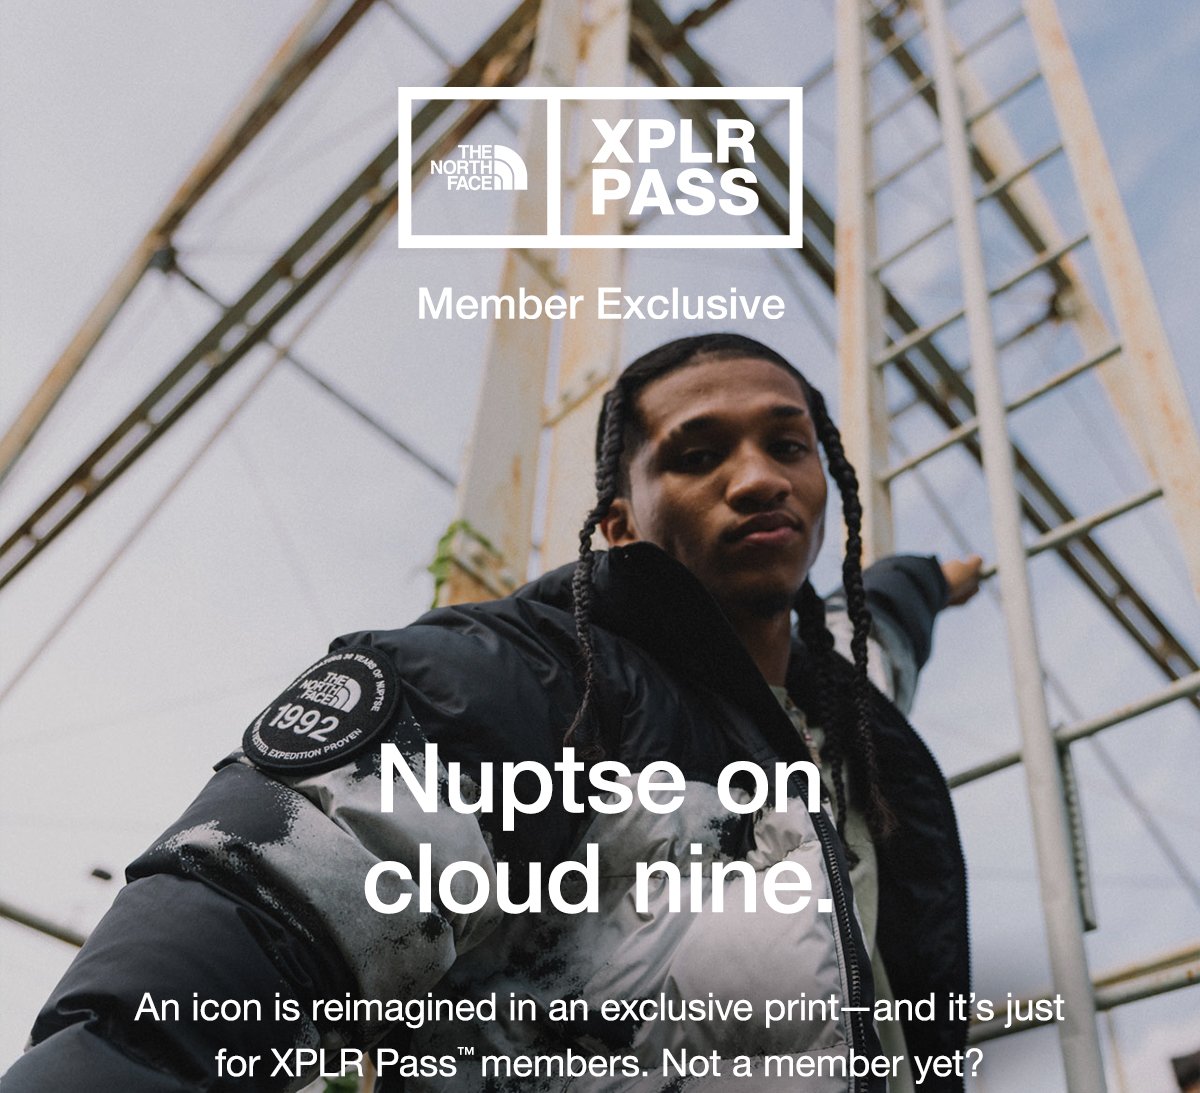 The North Face XPLR Pass. Nuptse on cloud nine. An icon is reimagined in an exclusive print-and it's just for XPLR Pass members. Not a member yet? Join today, it's free.